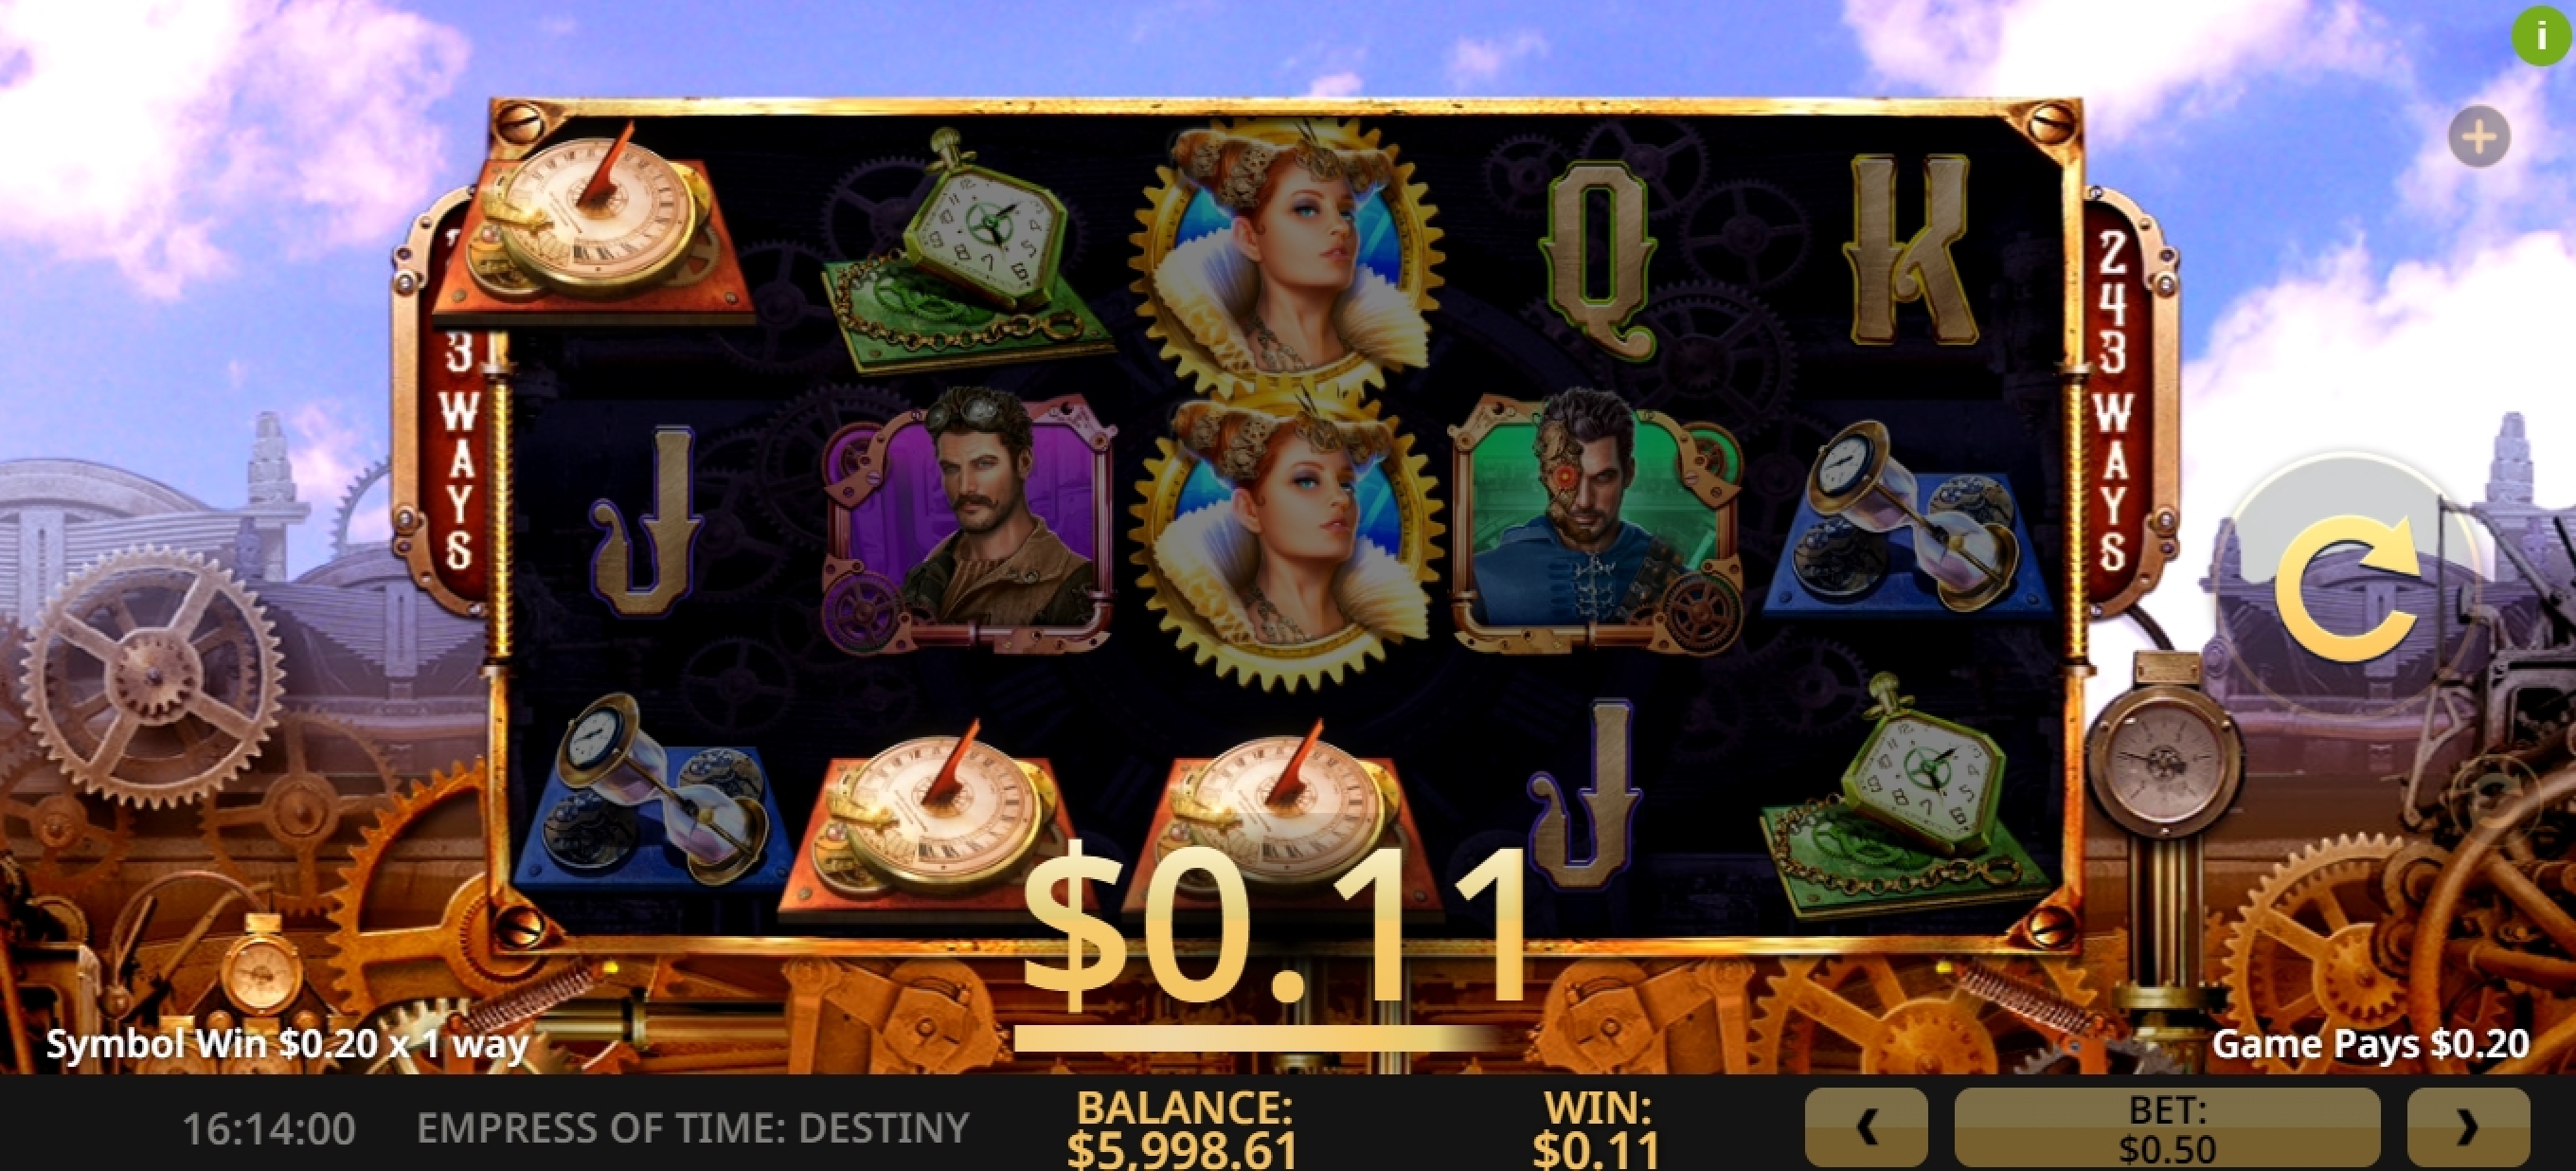 Win Money in Empress of Time: Destiny Free Slot Game by High 5 Games